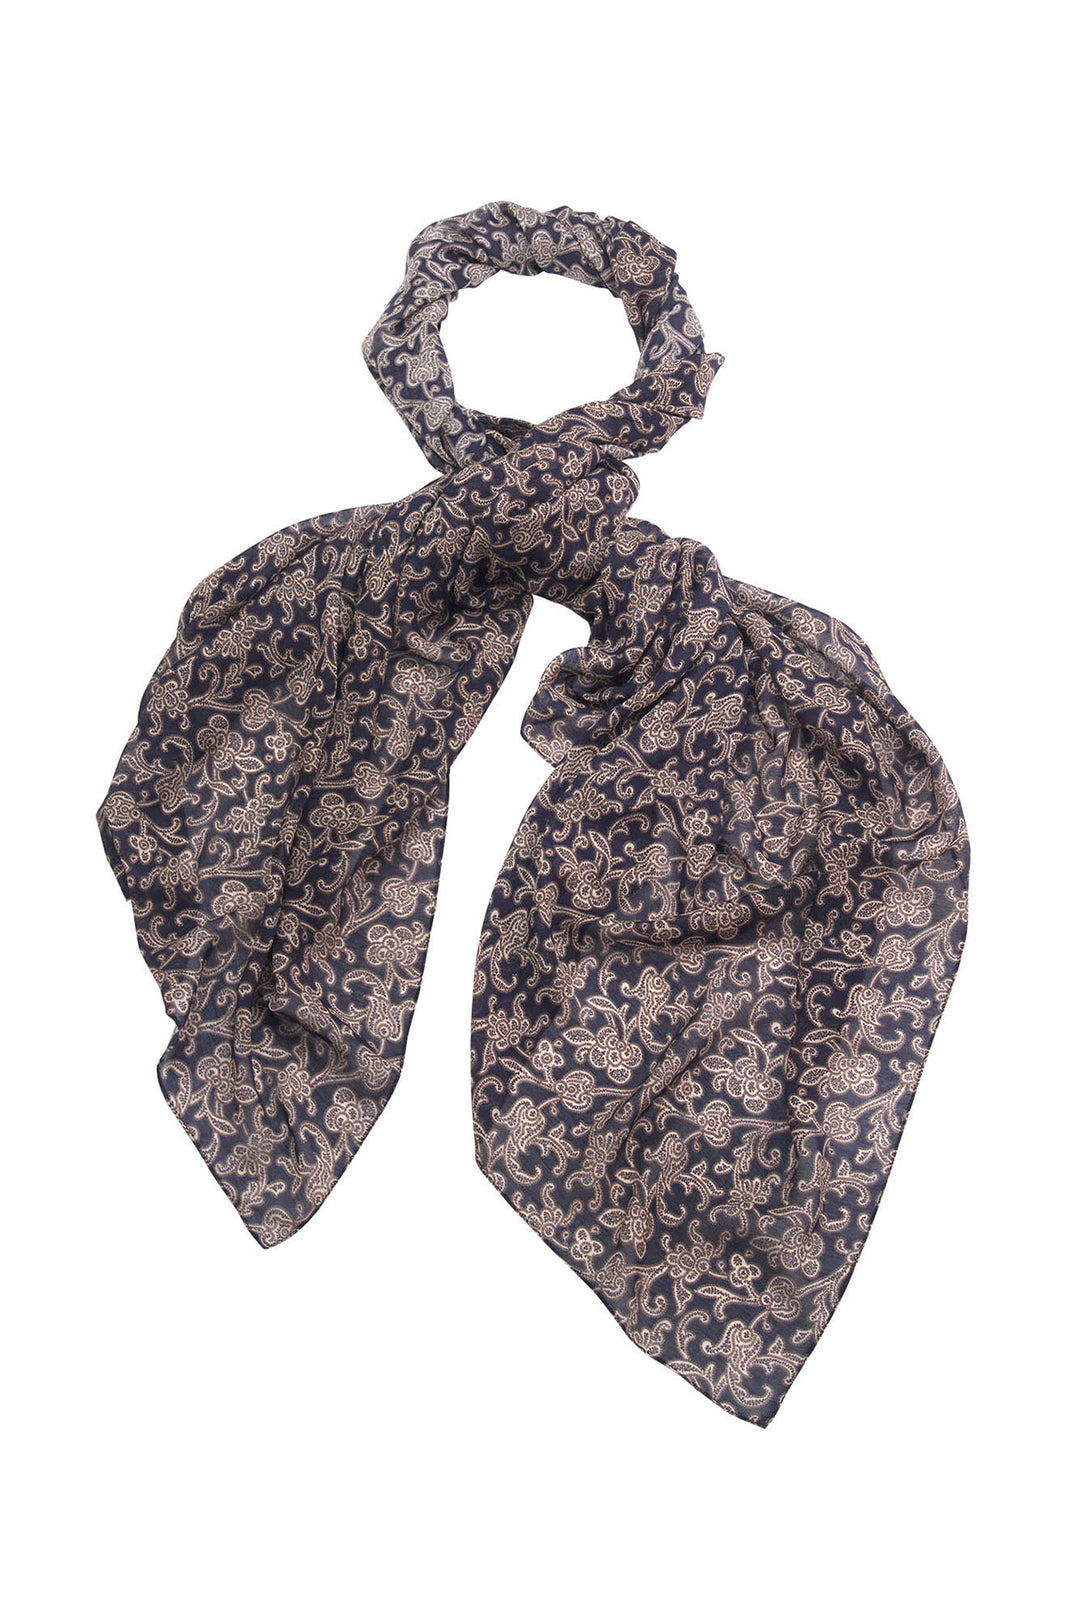 winter ladies scarf patterned in blue paisley print by One Hundred Stars